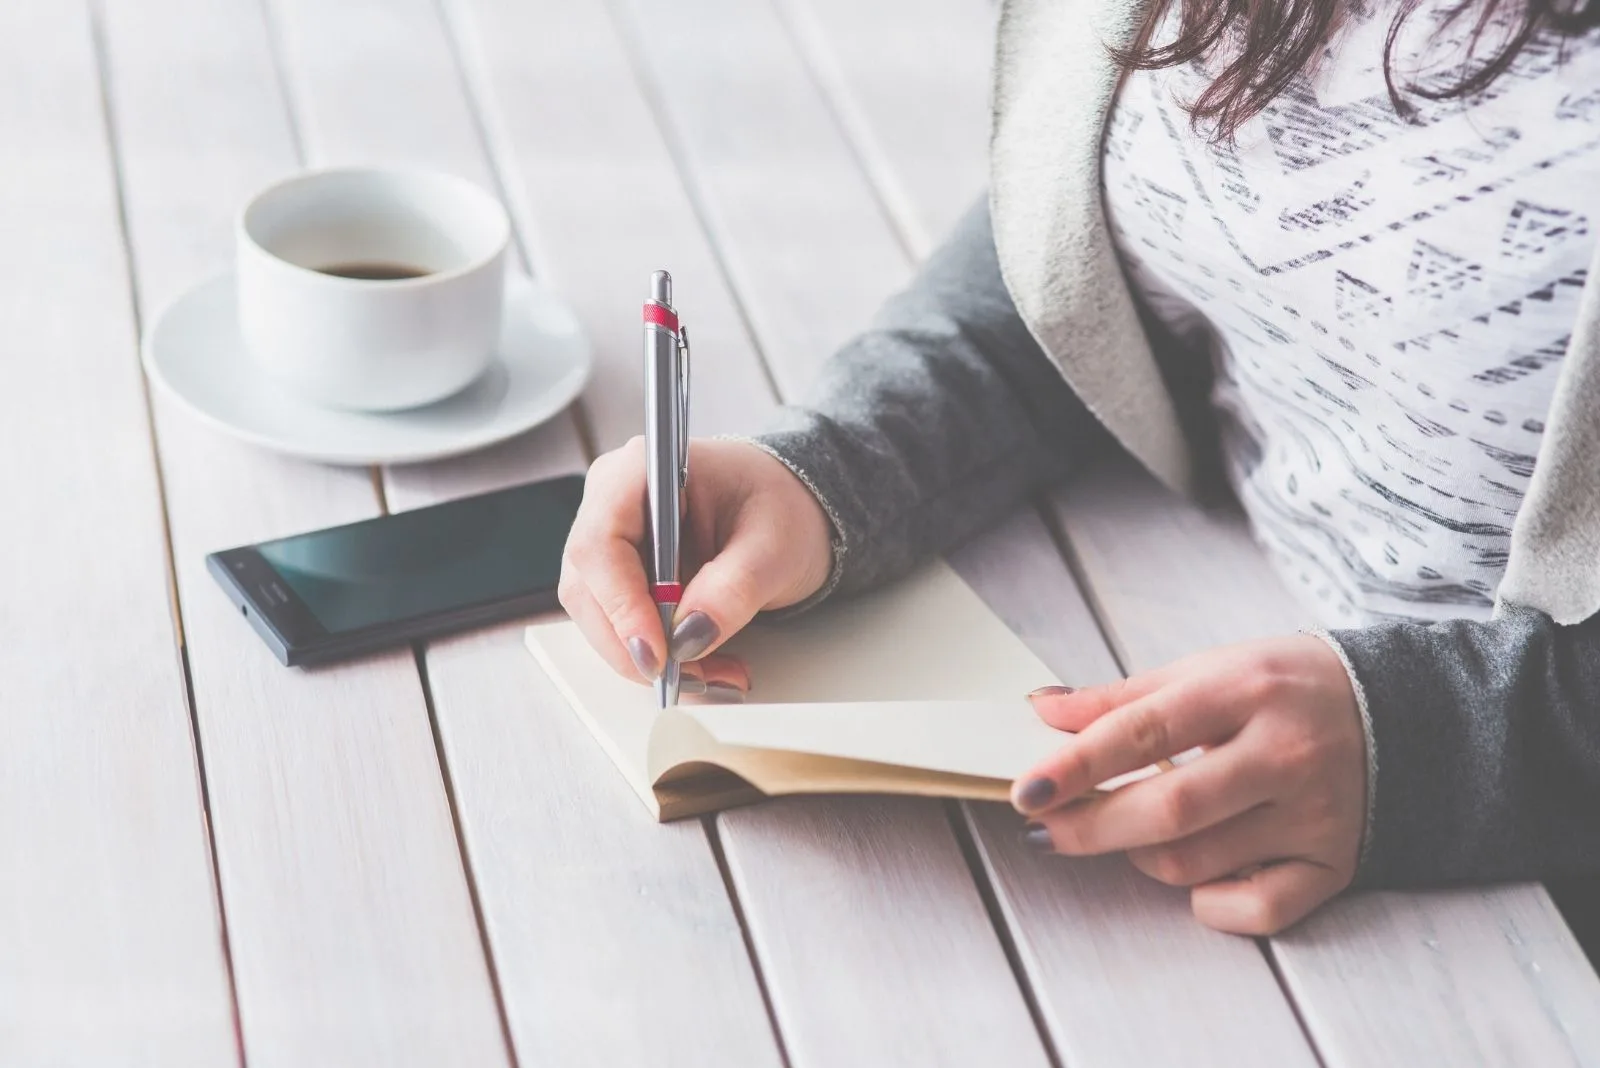 woman writing on her journal on a wooden table with phone and coffee on the table in cropped image